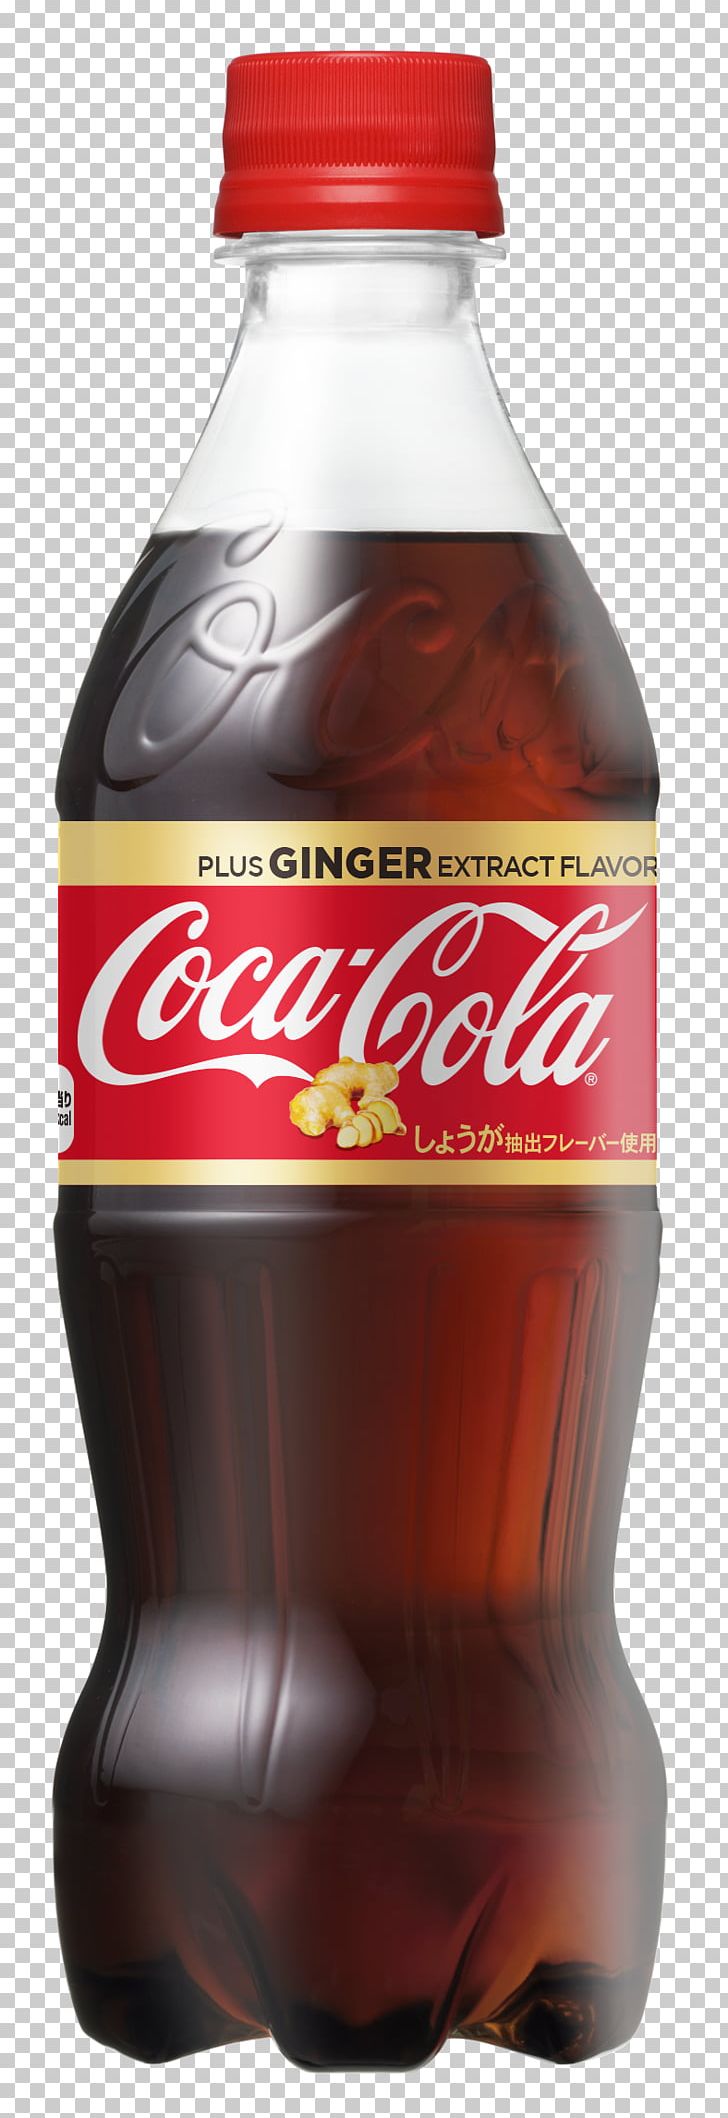 Coca-Cola Cherry Fizzy Drinks Glass Bottle PNG, Clipart, Aphrodisiac, Bottle, Caffeine, Carbonated Soft Drinks, Coca Free PNG Download